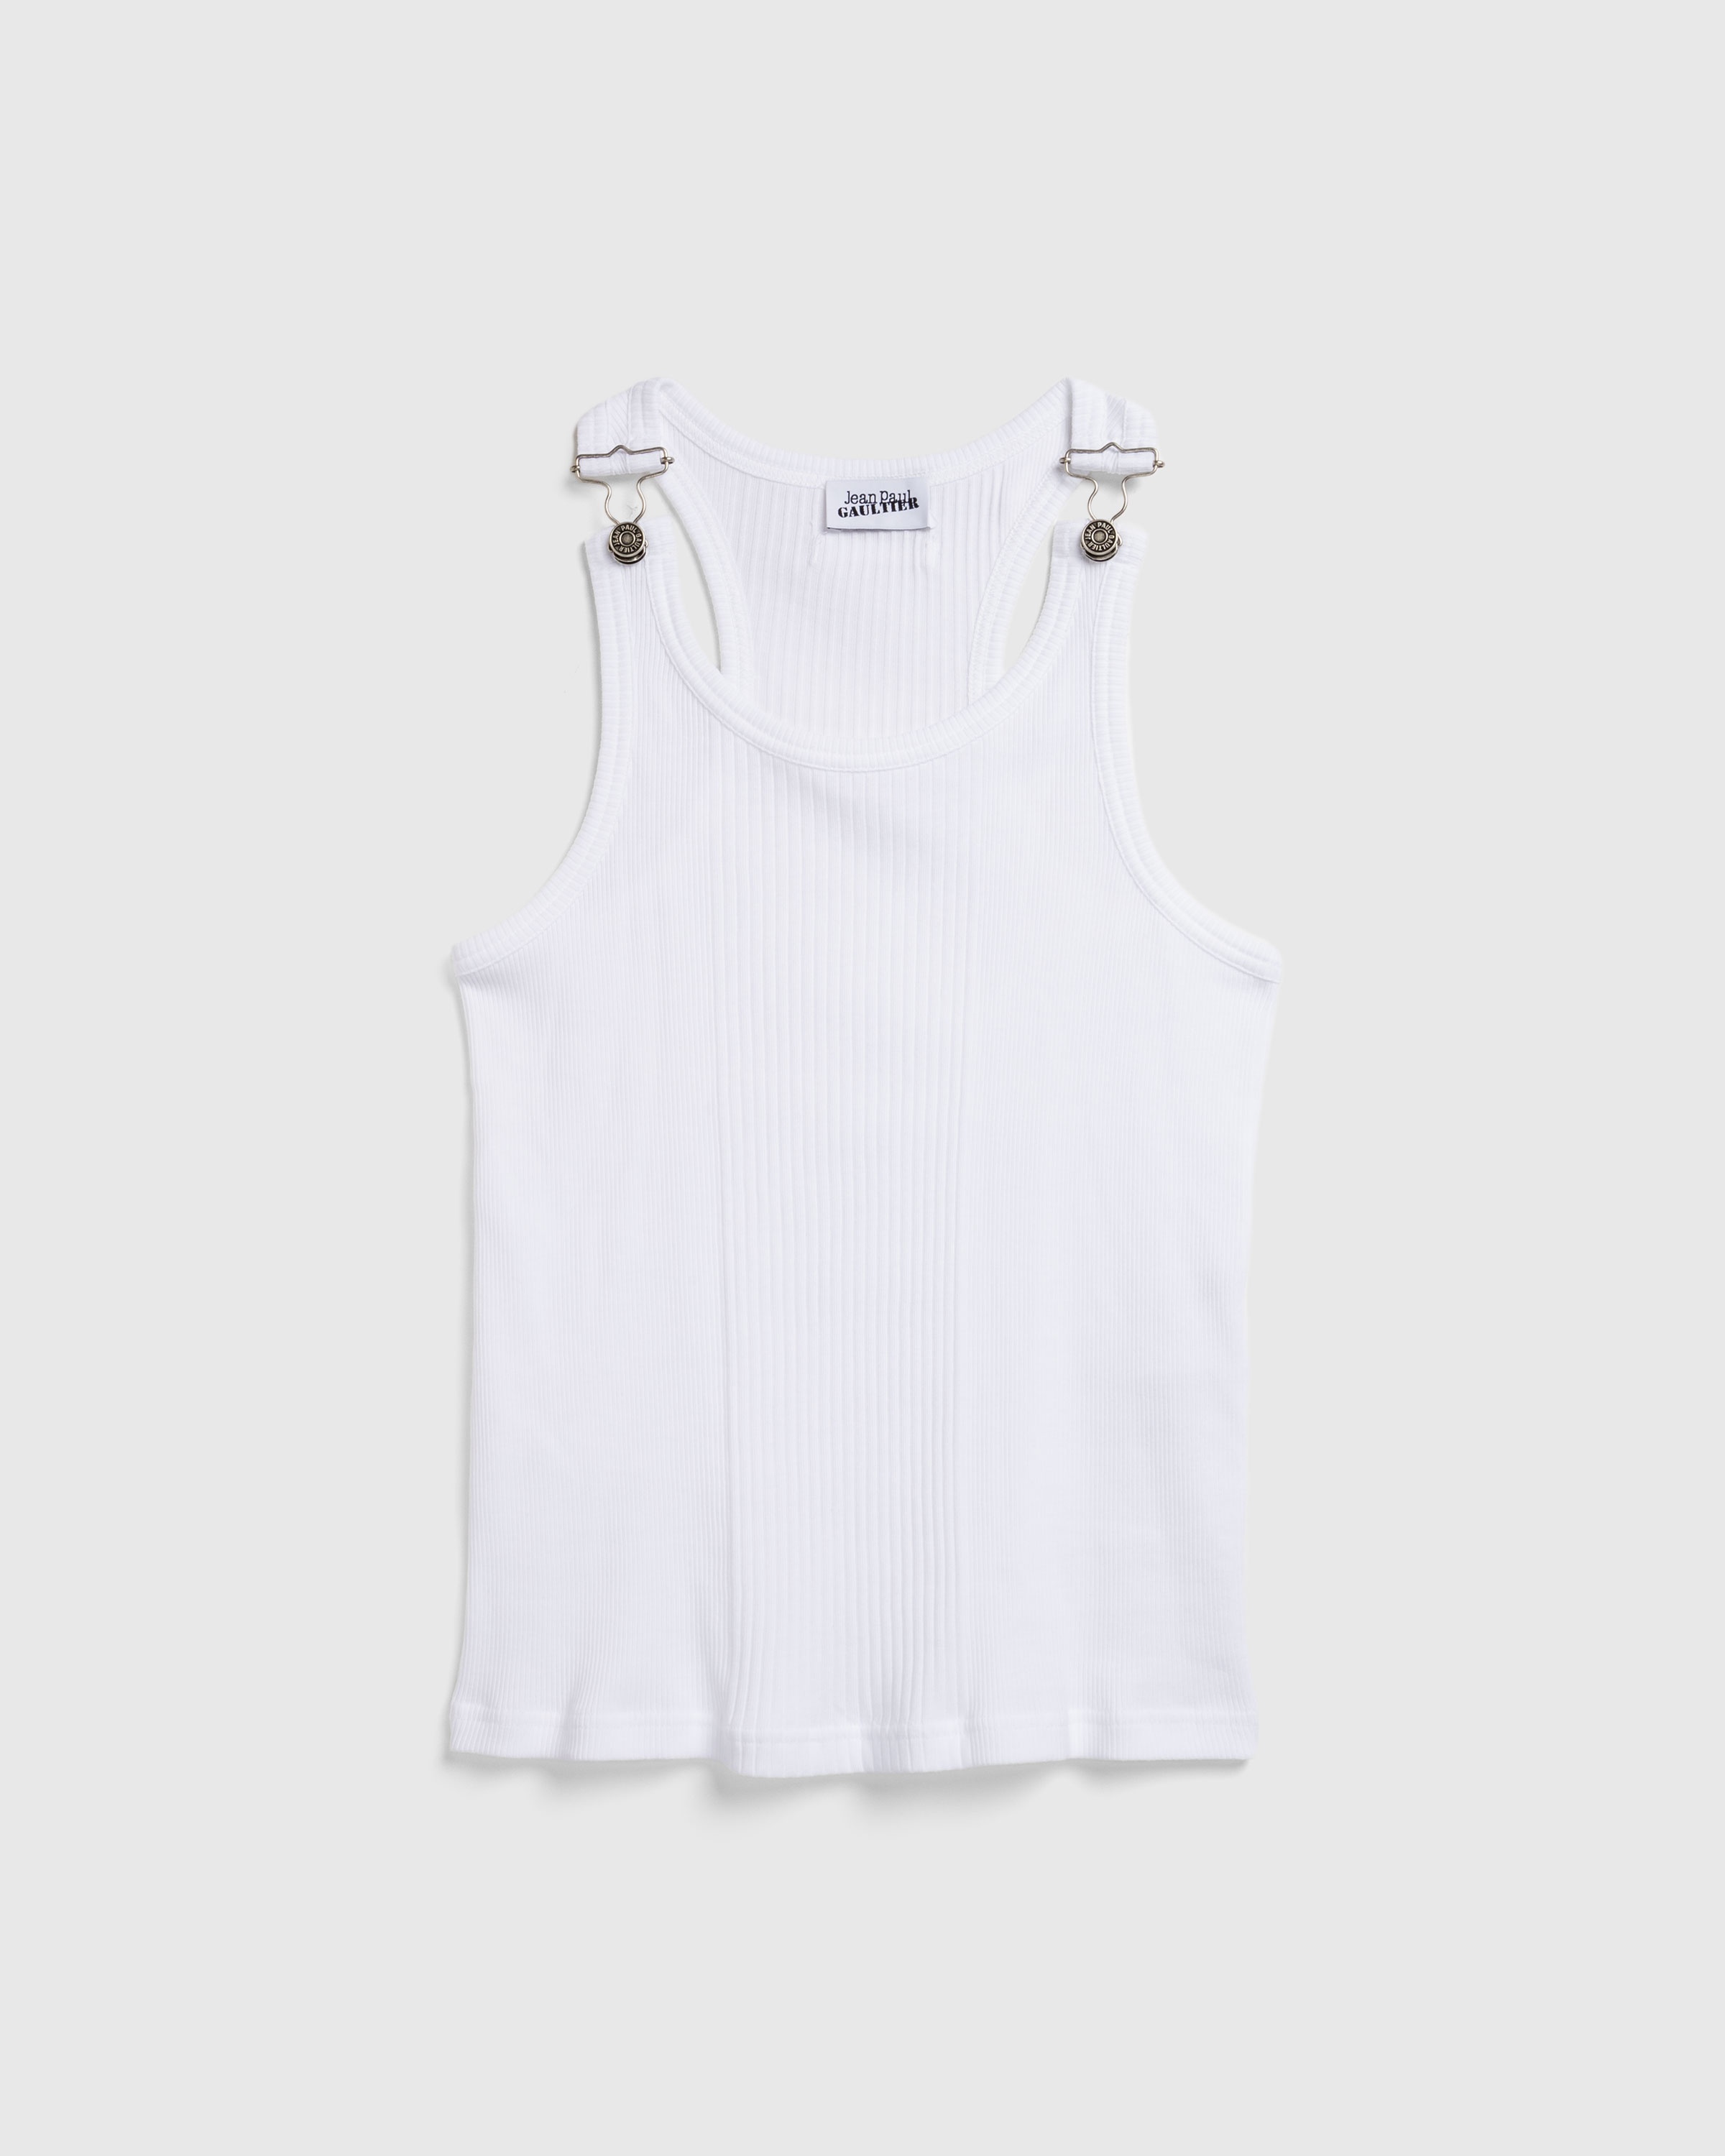 Jean Paul Gaultier – Ribbed Tank Top With Overall Buckles White - 1